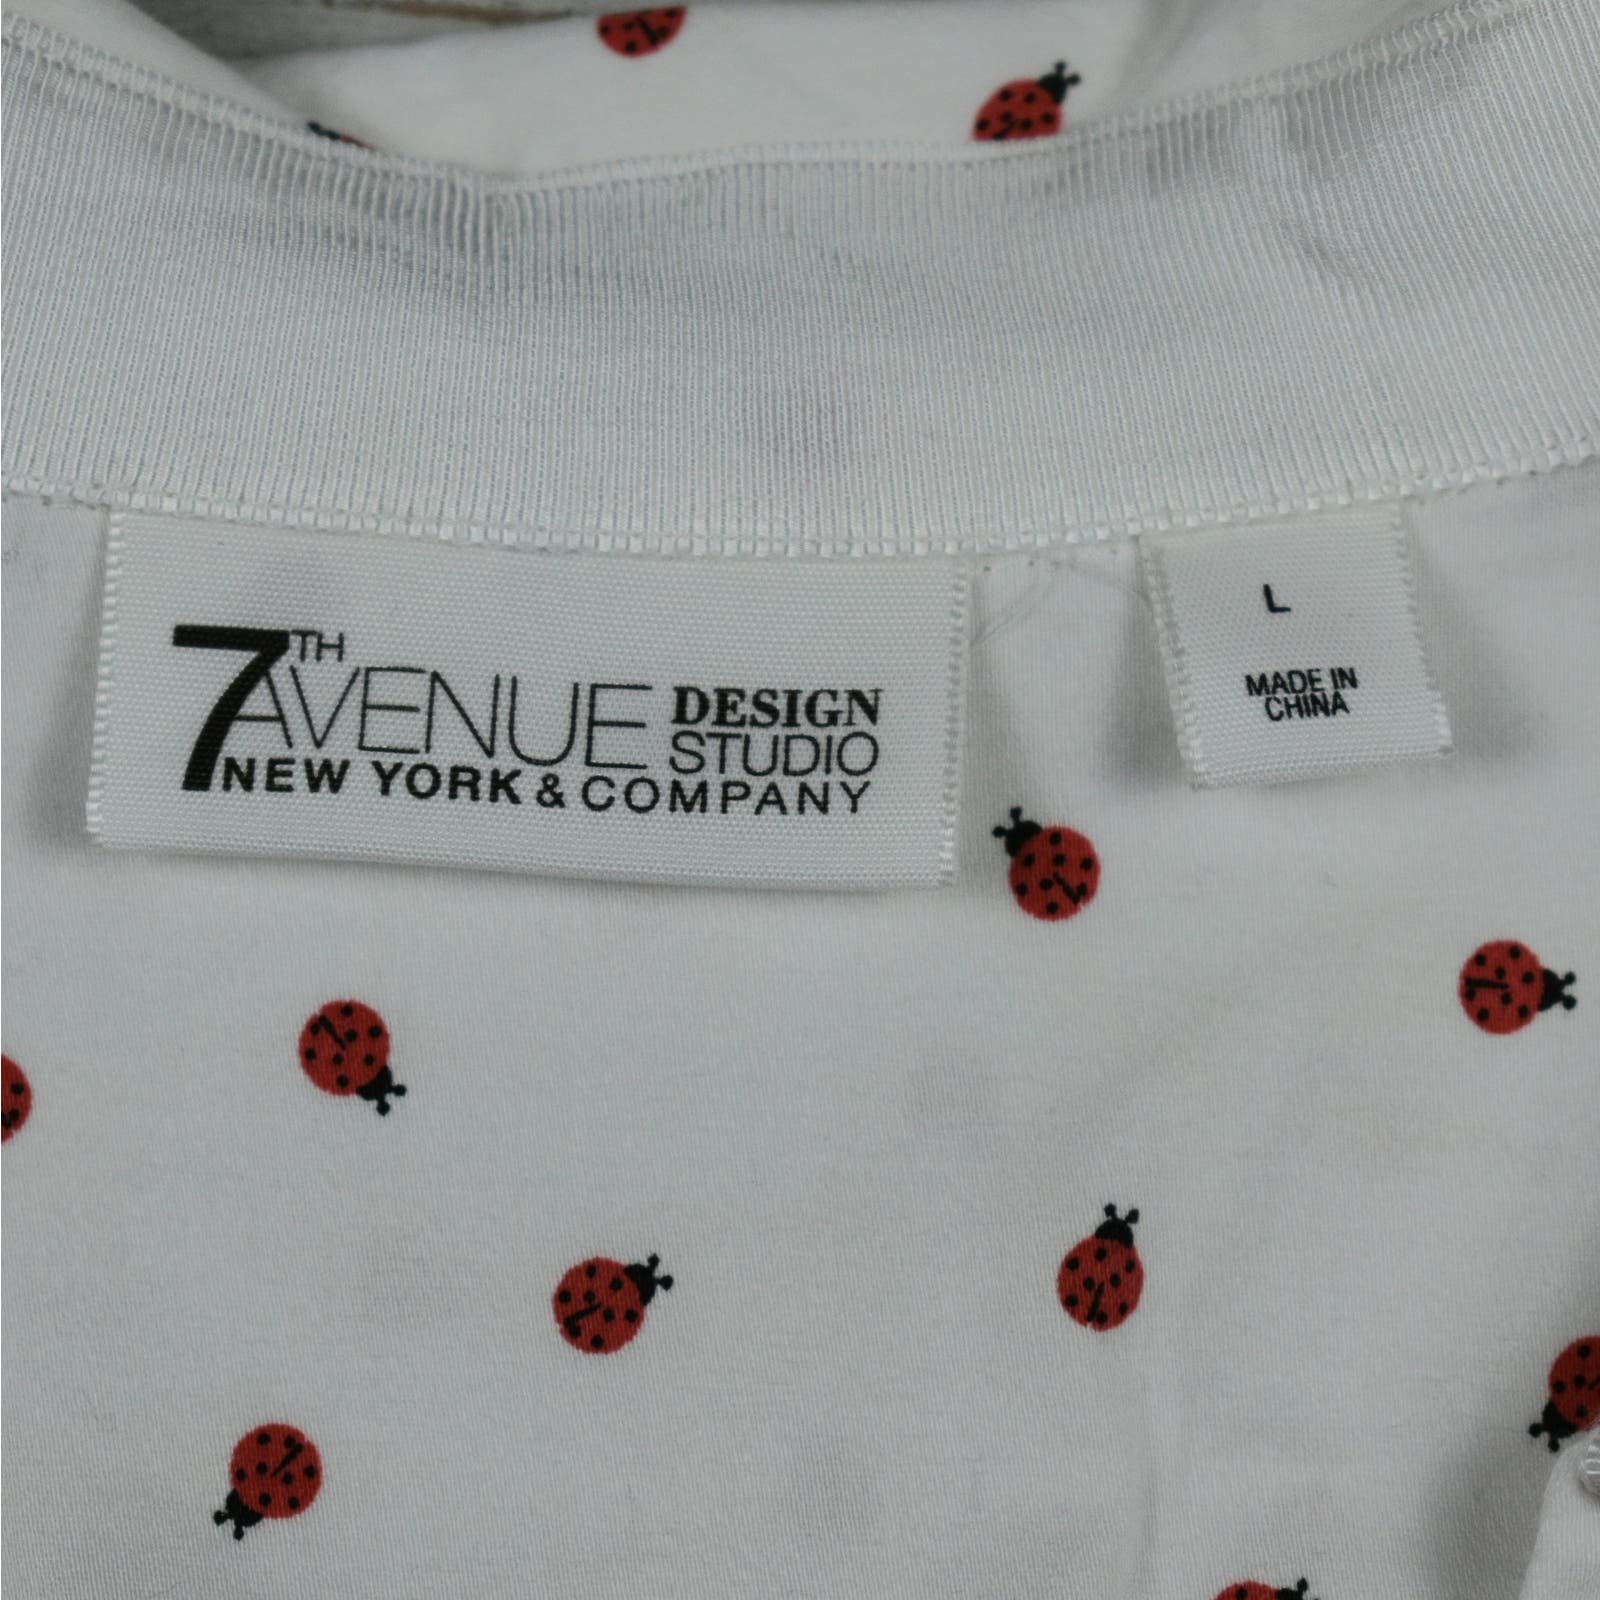 Nice Novelty red ladybug white button down half sleeve shirt New York & Co sz large oO3wI8FsR US Outlet